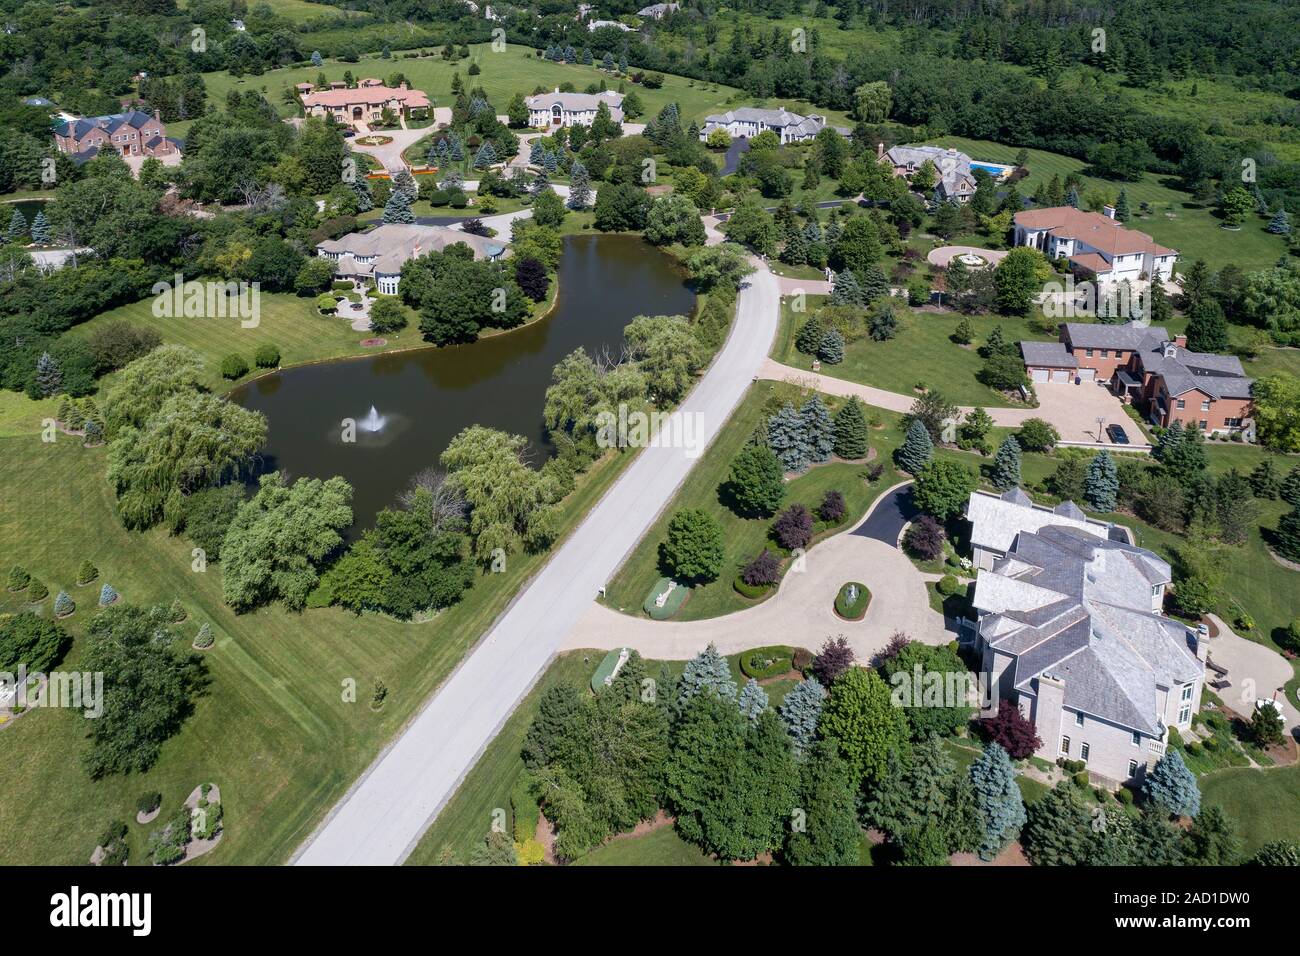 Aerial view of a luxury neighborhood with large homes and a pond in a Chicago suburban neighborhood during summer. Stock Photo